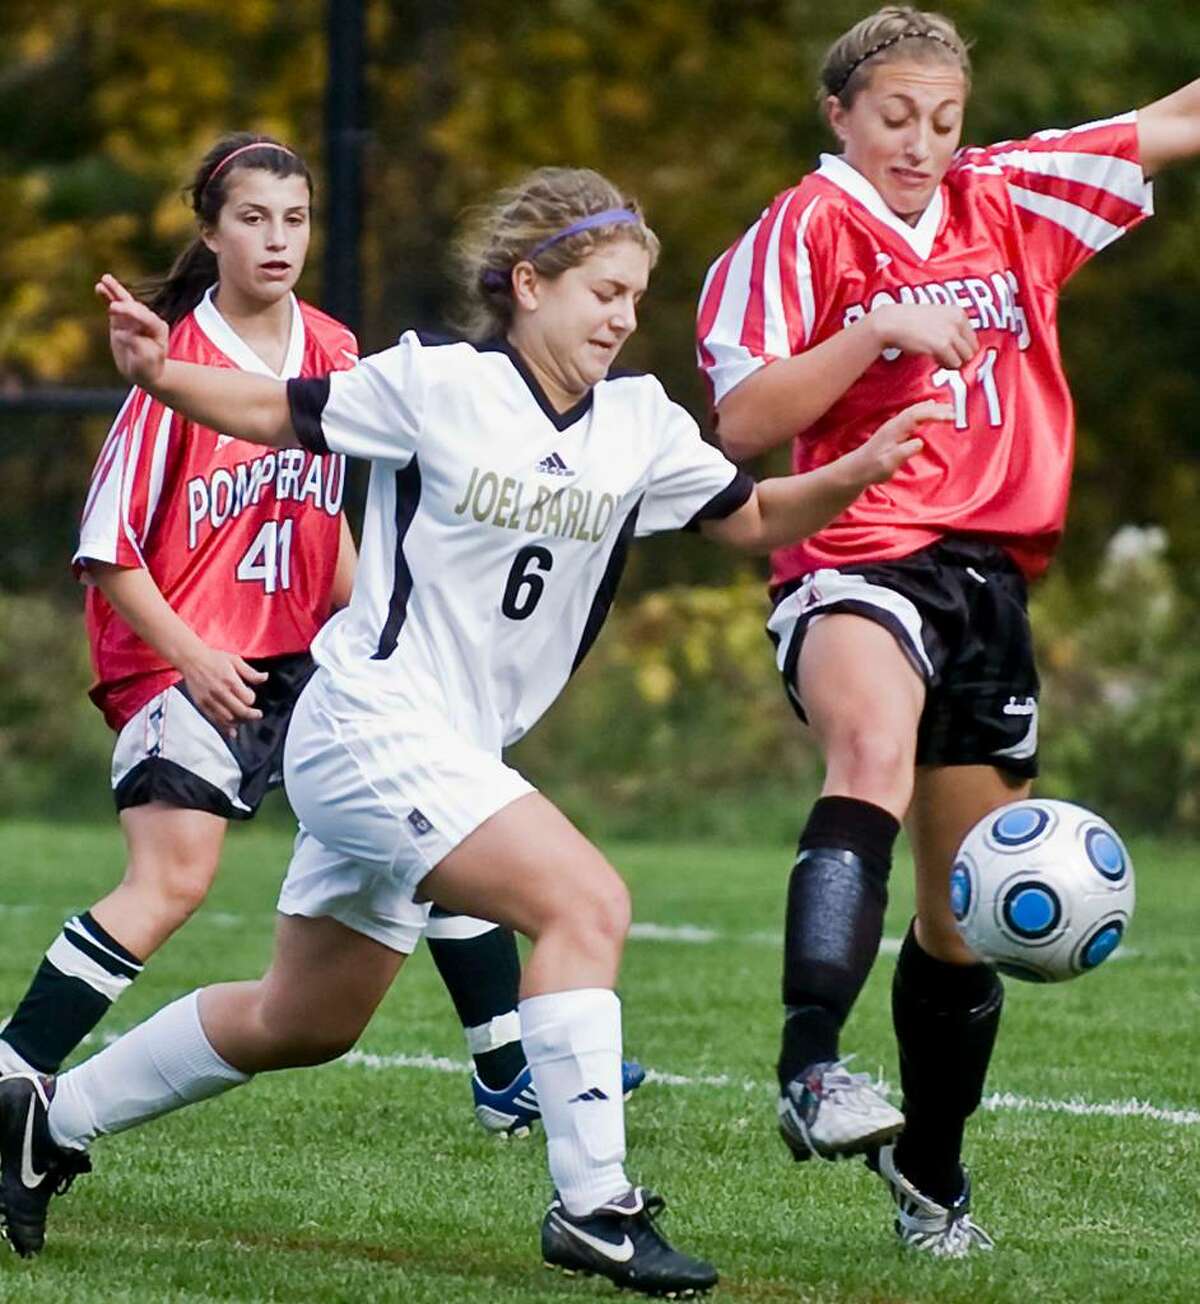 Barlow junior Delaney Bracken and Pomperaug senior Lauren Varholak try and get possession of the ball in a girls soccer game at Barlow. Monday, Oct. 5, 2009